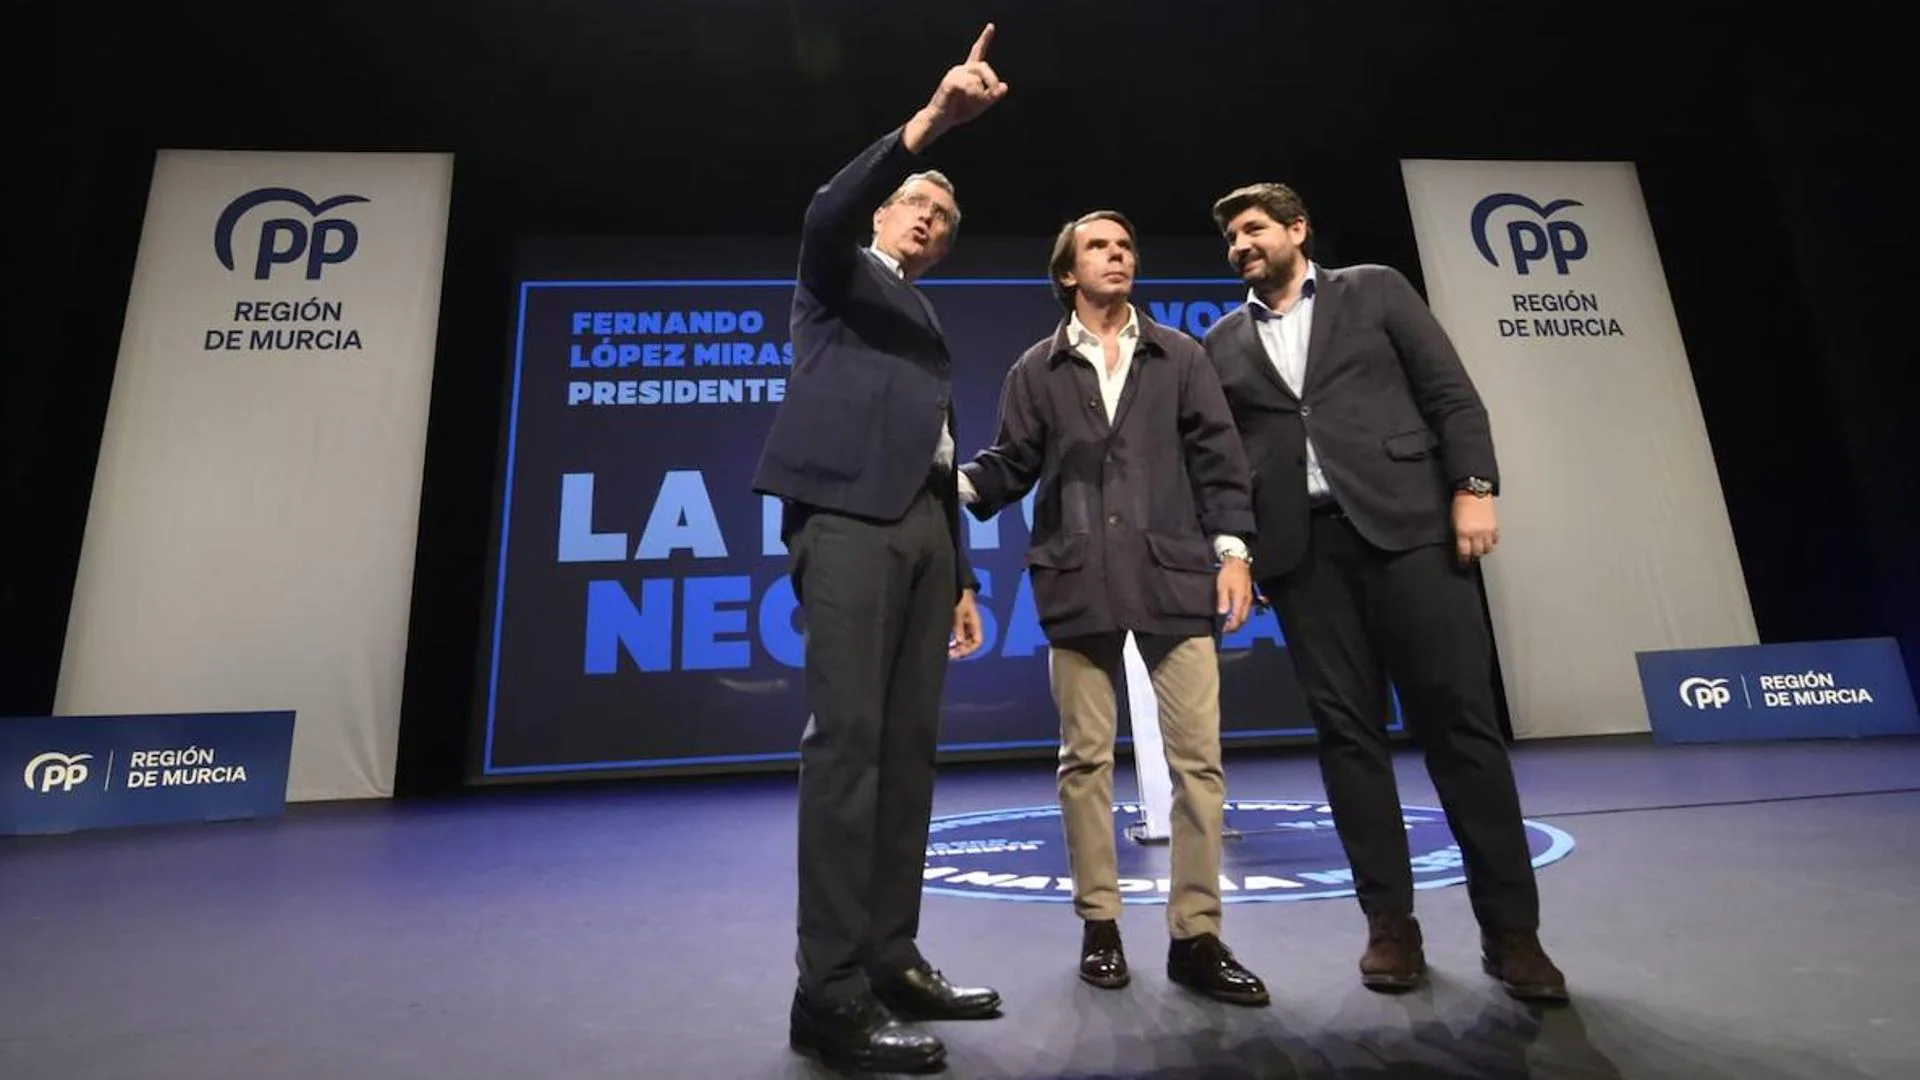 Aznar, Miras and Ballesta demand voting unity in Murcia to achieve governments “with a solid, broad majority and with clear ideas”